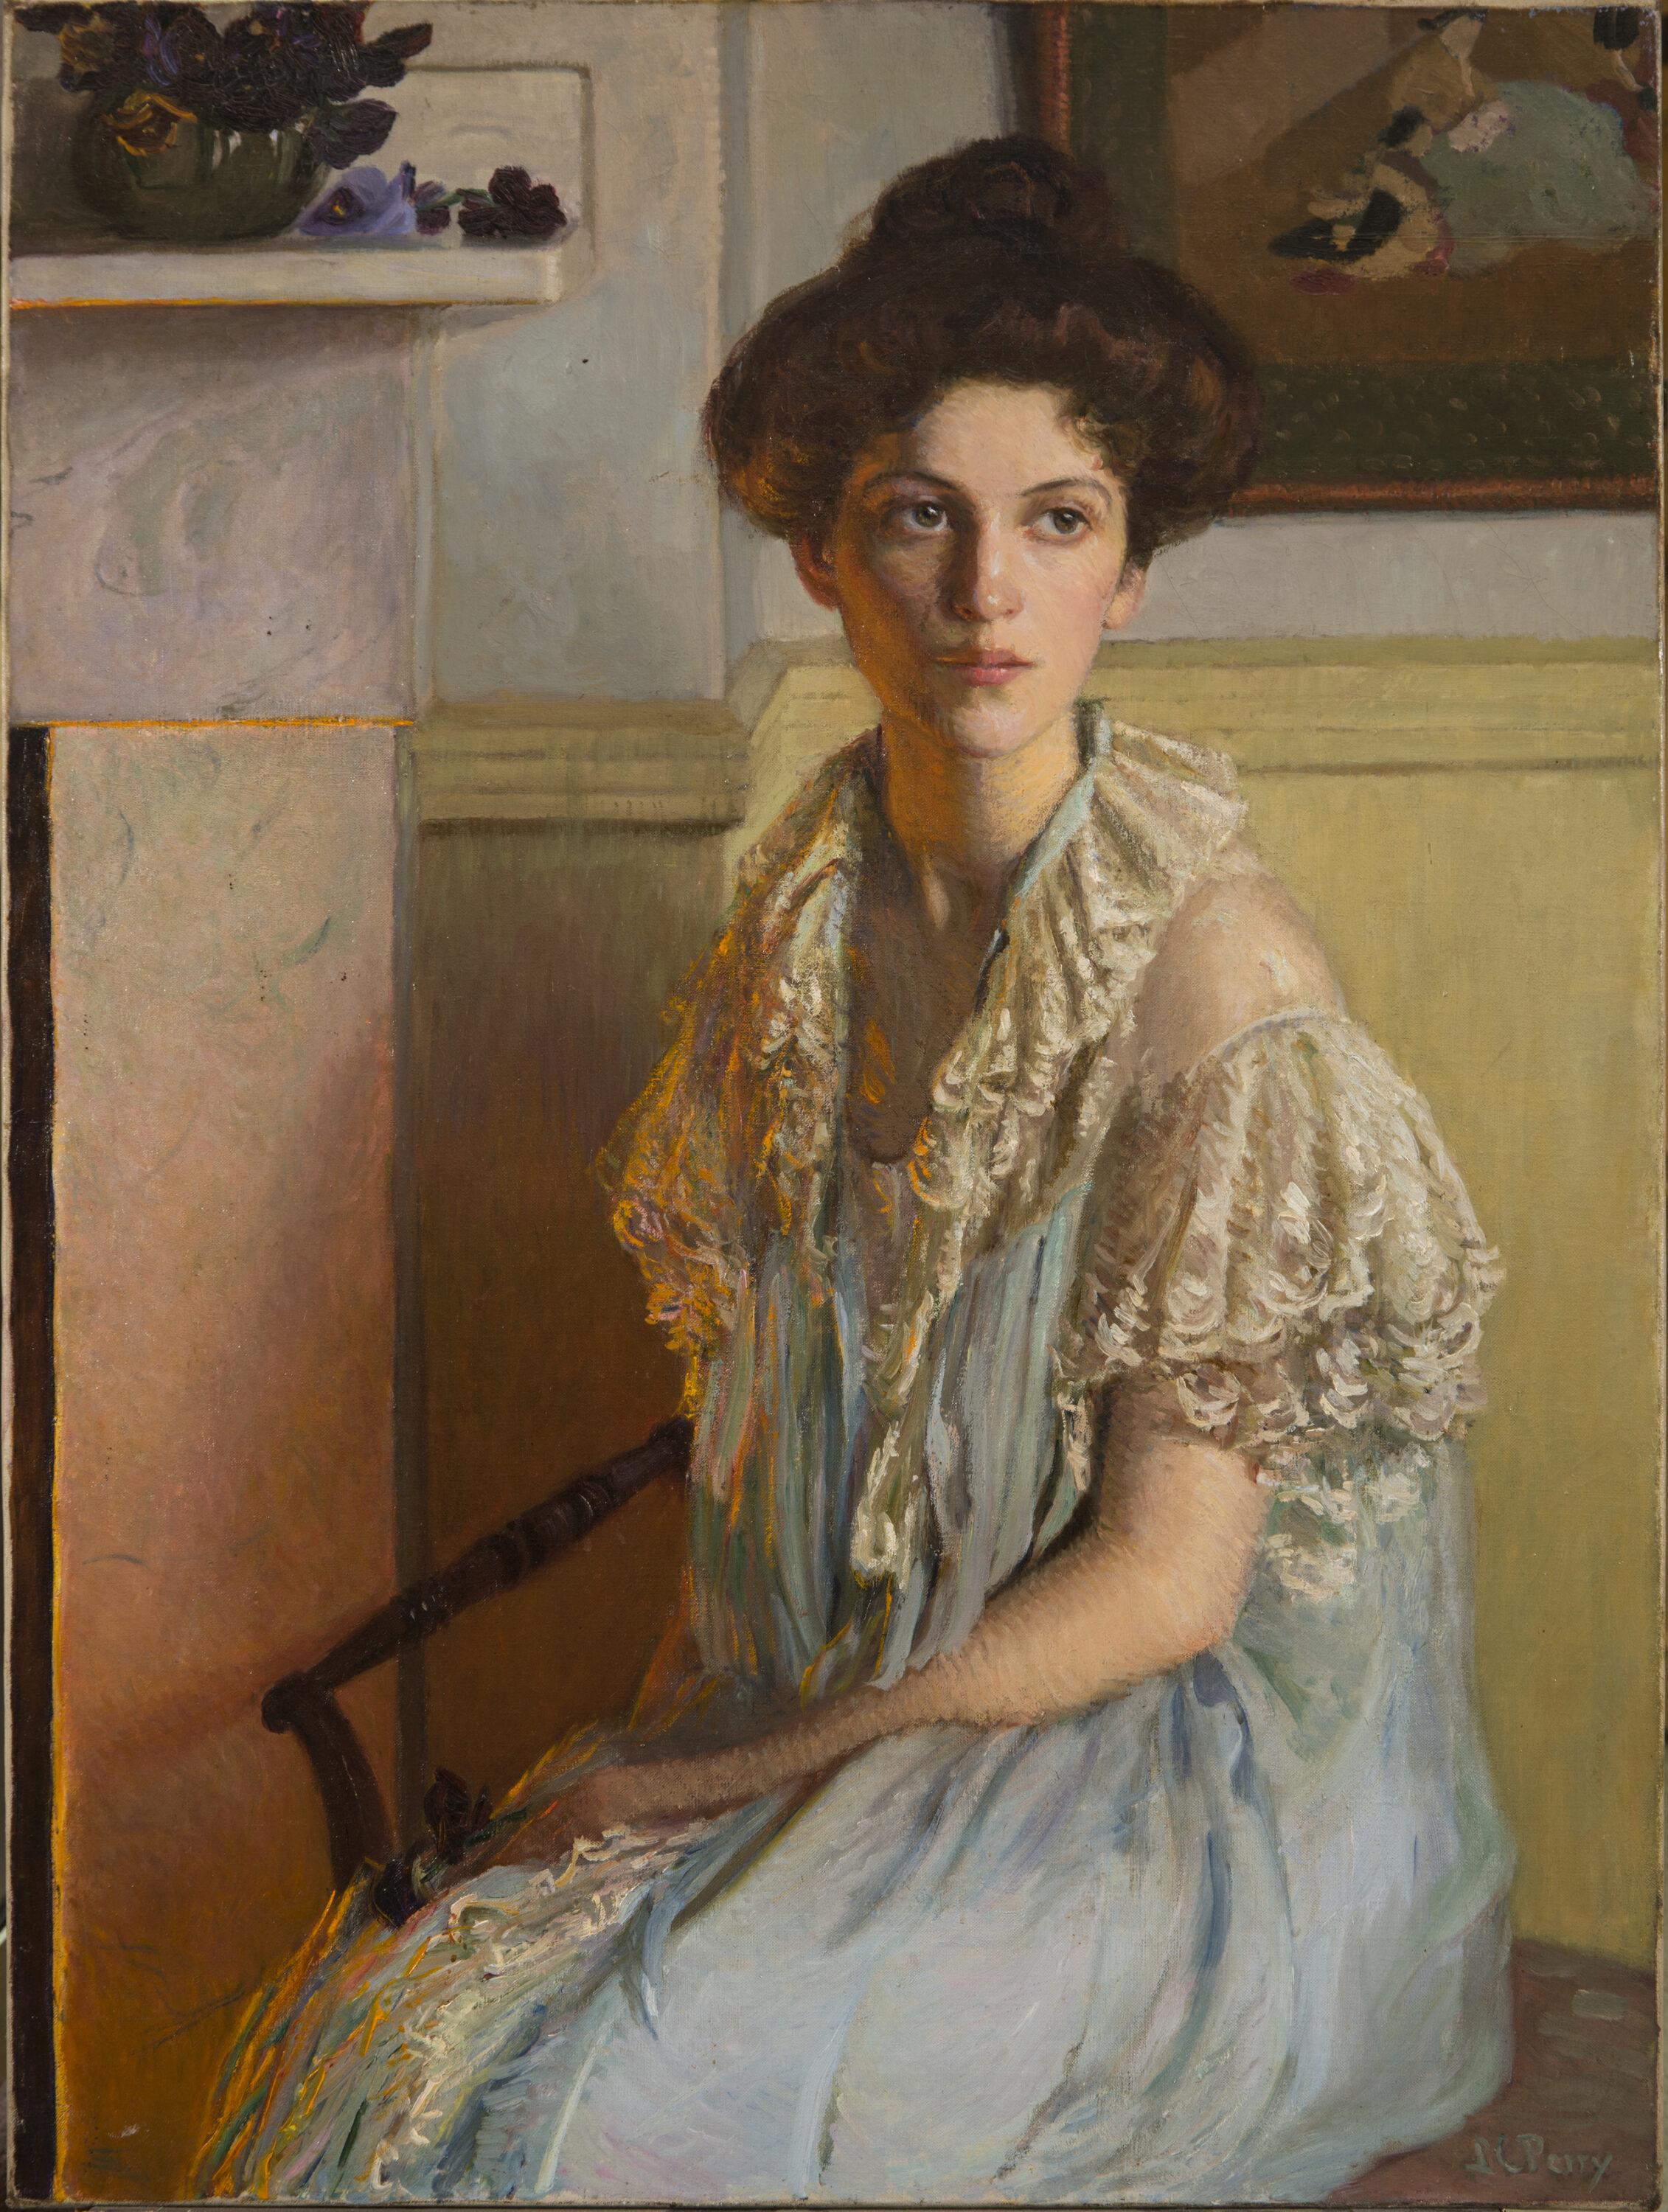 A young woman sits on a chair with her hair in a loose bun, wearing a white lace-trim gown. Her body turns slightly right towards a fireplace, its orange glow reflected on her hair and torso. The room is light and clean and a dark bowl overflowing with violets sits on the mantle.